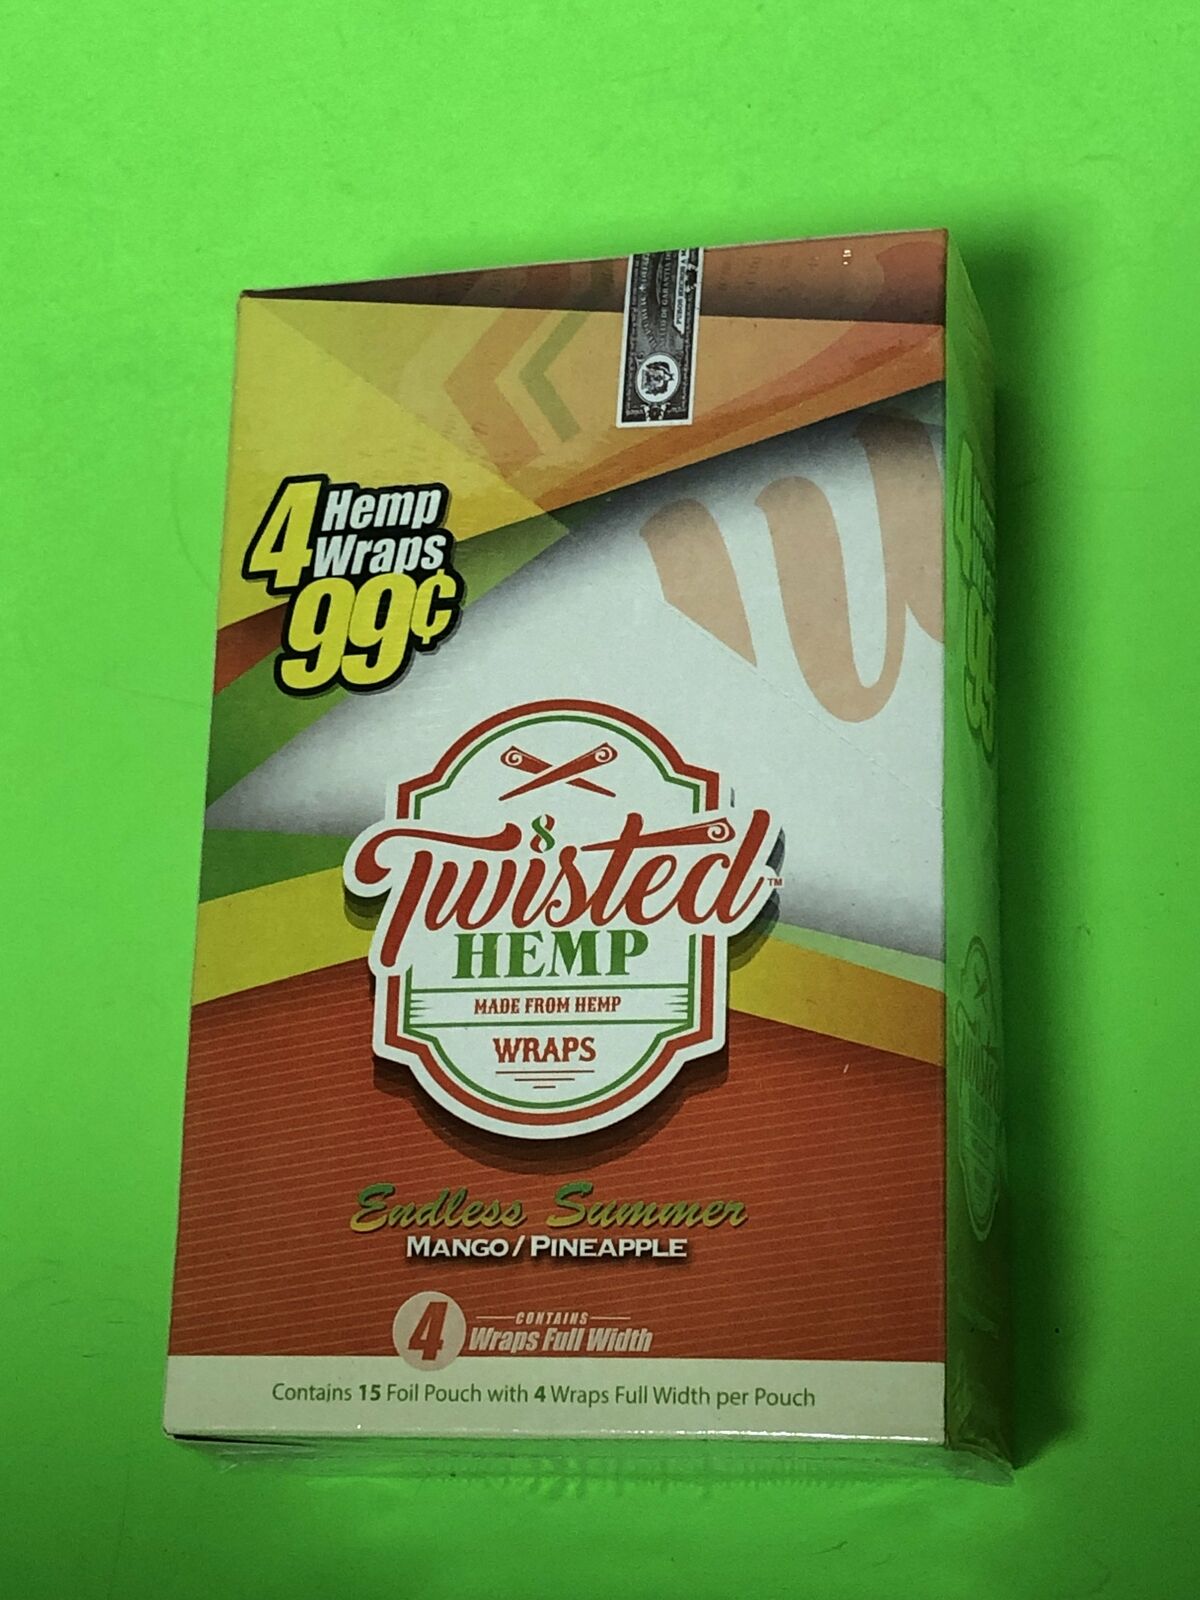 FREE GIFT🎁Endless Summer Mango🥭Pineapple🍍60 High Quality Twisted Hemp🍁Papers